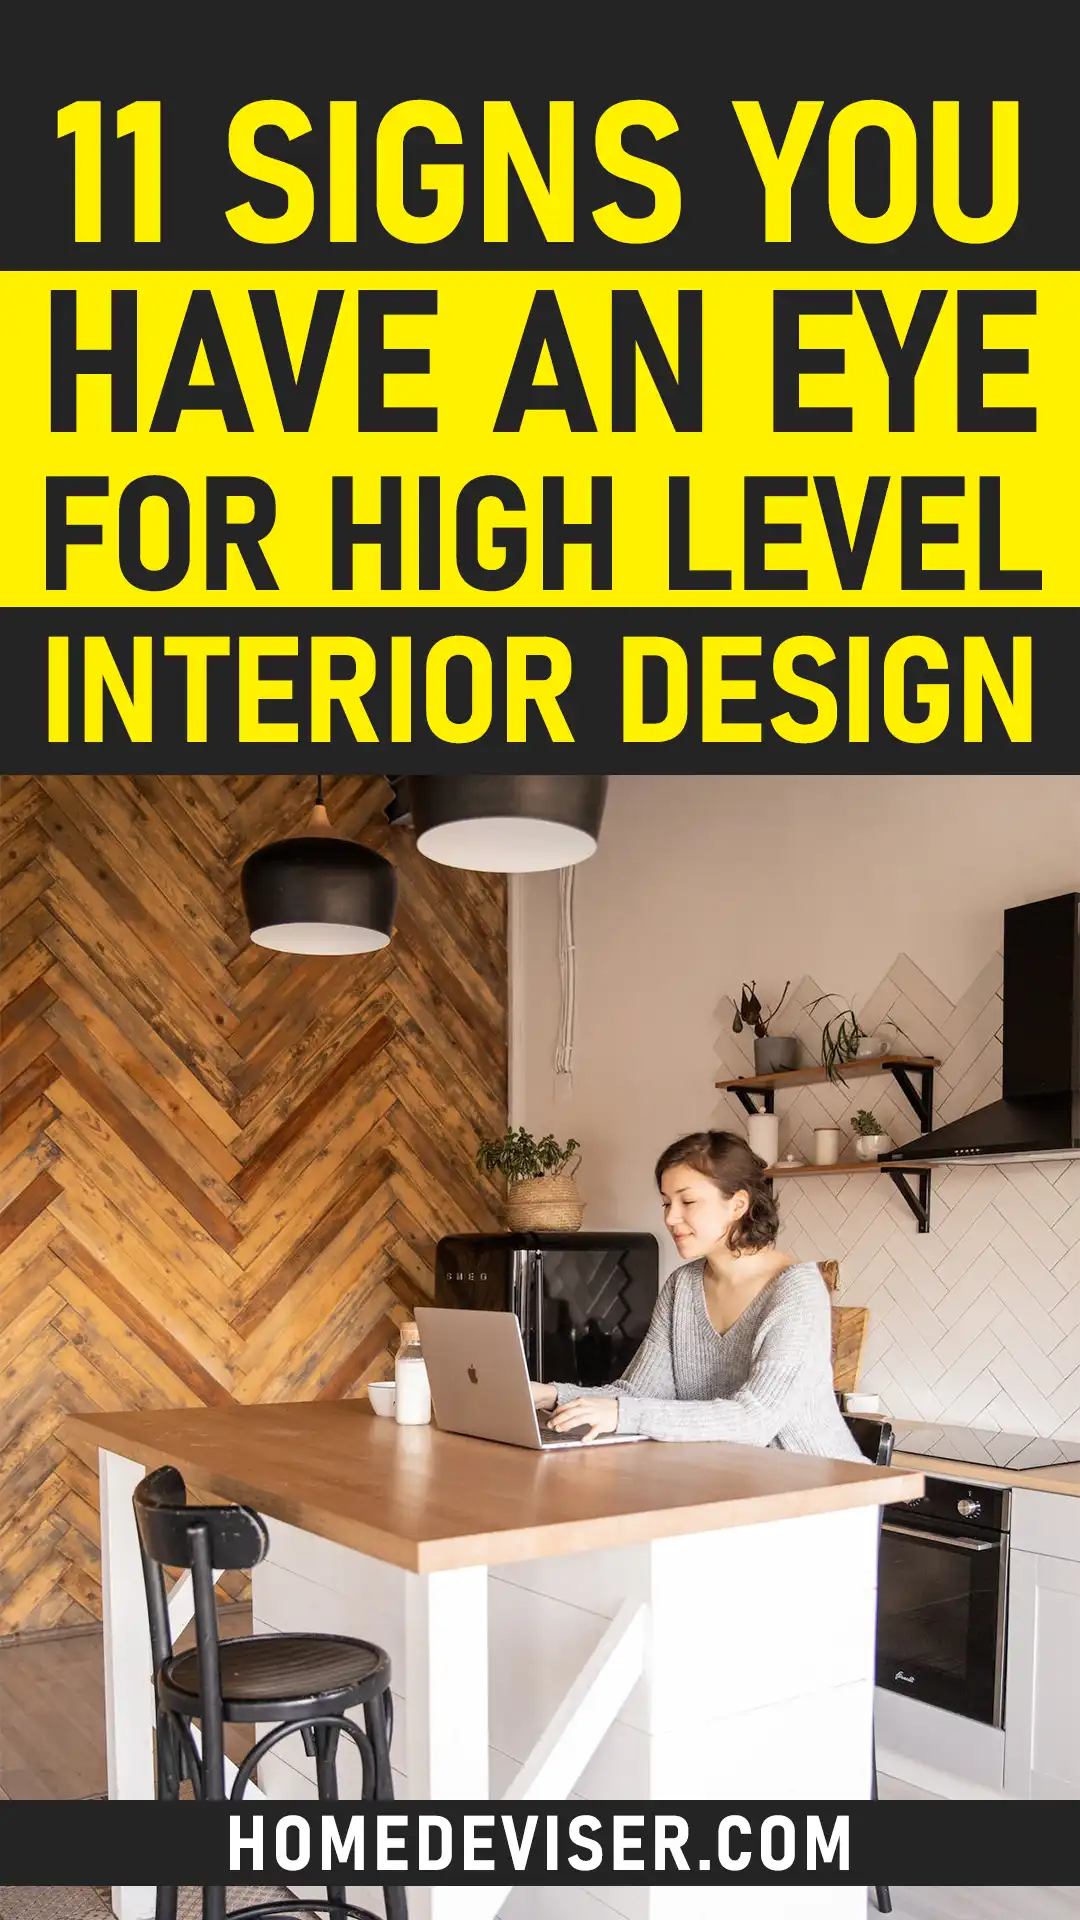 11 Signs You Have an Eye for High Level Interior Design